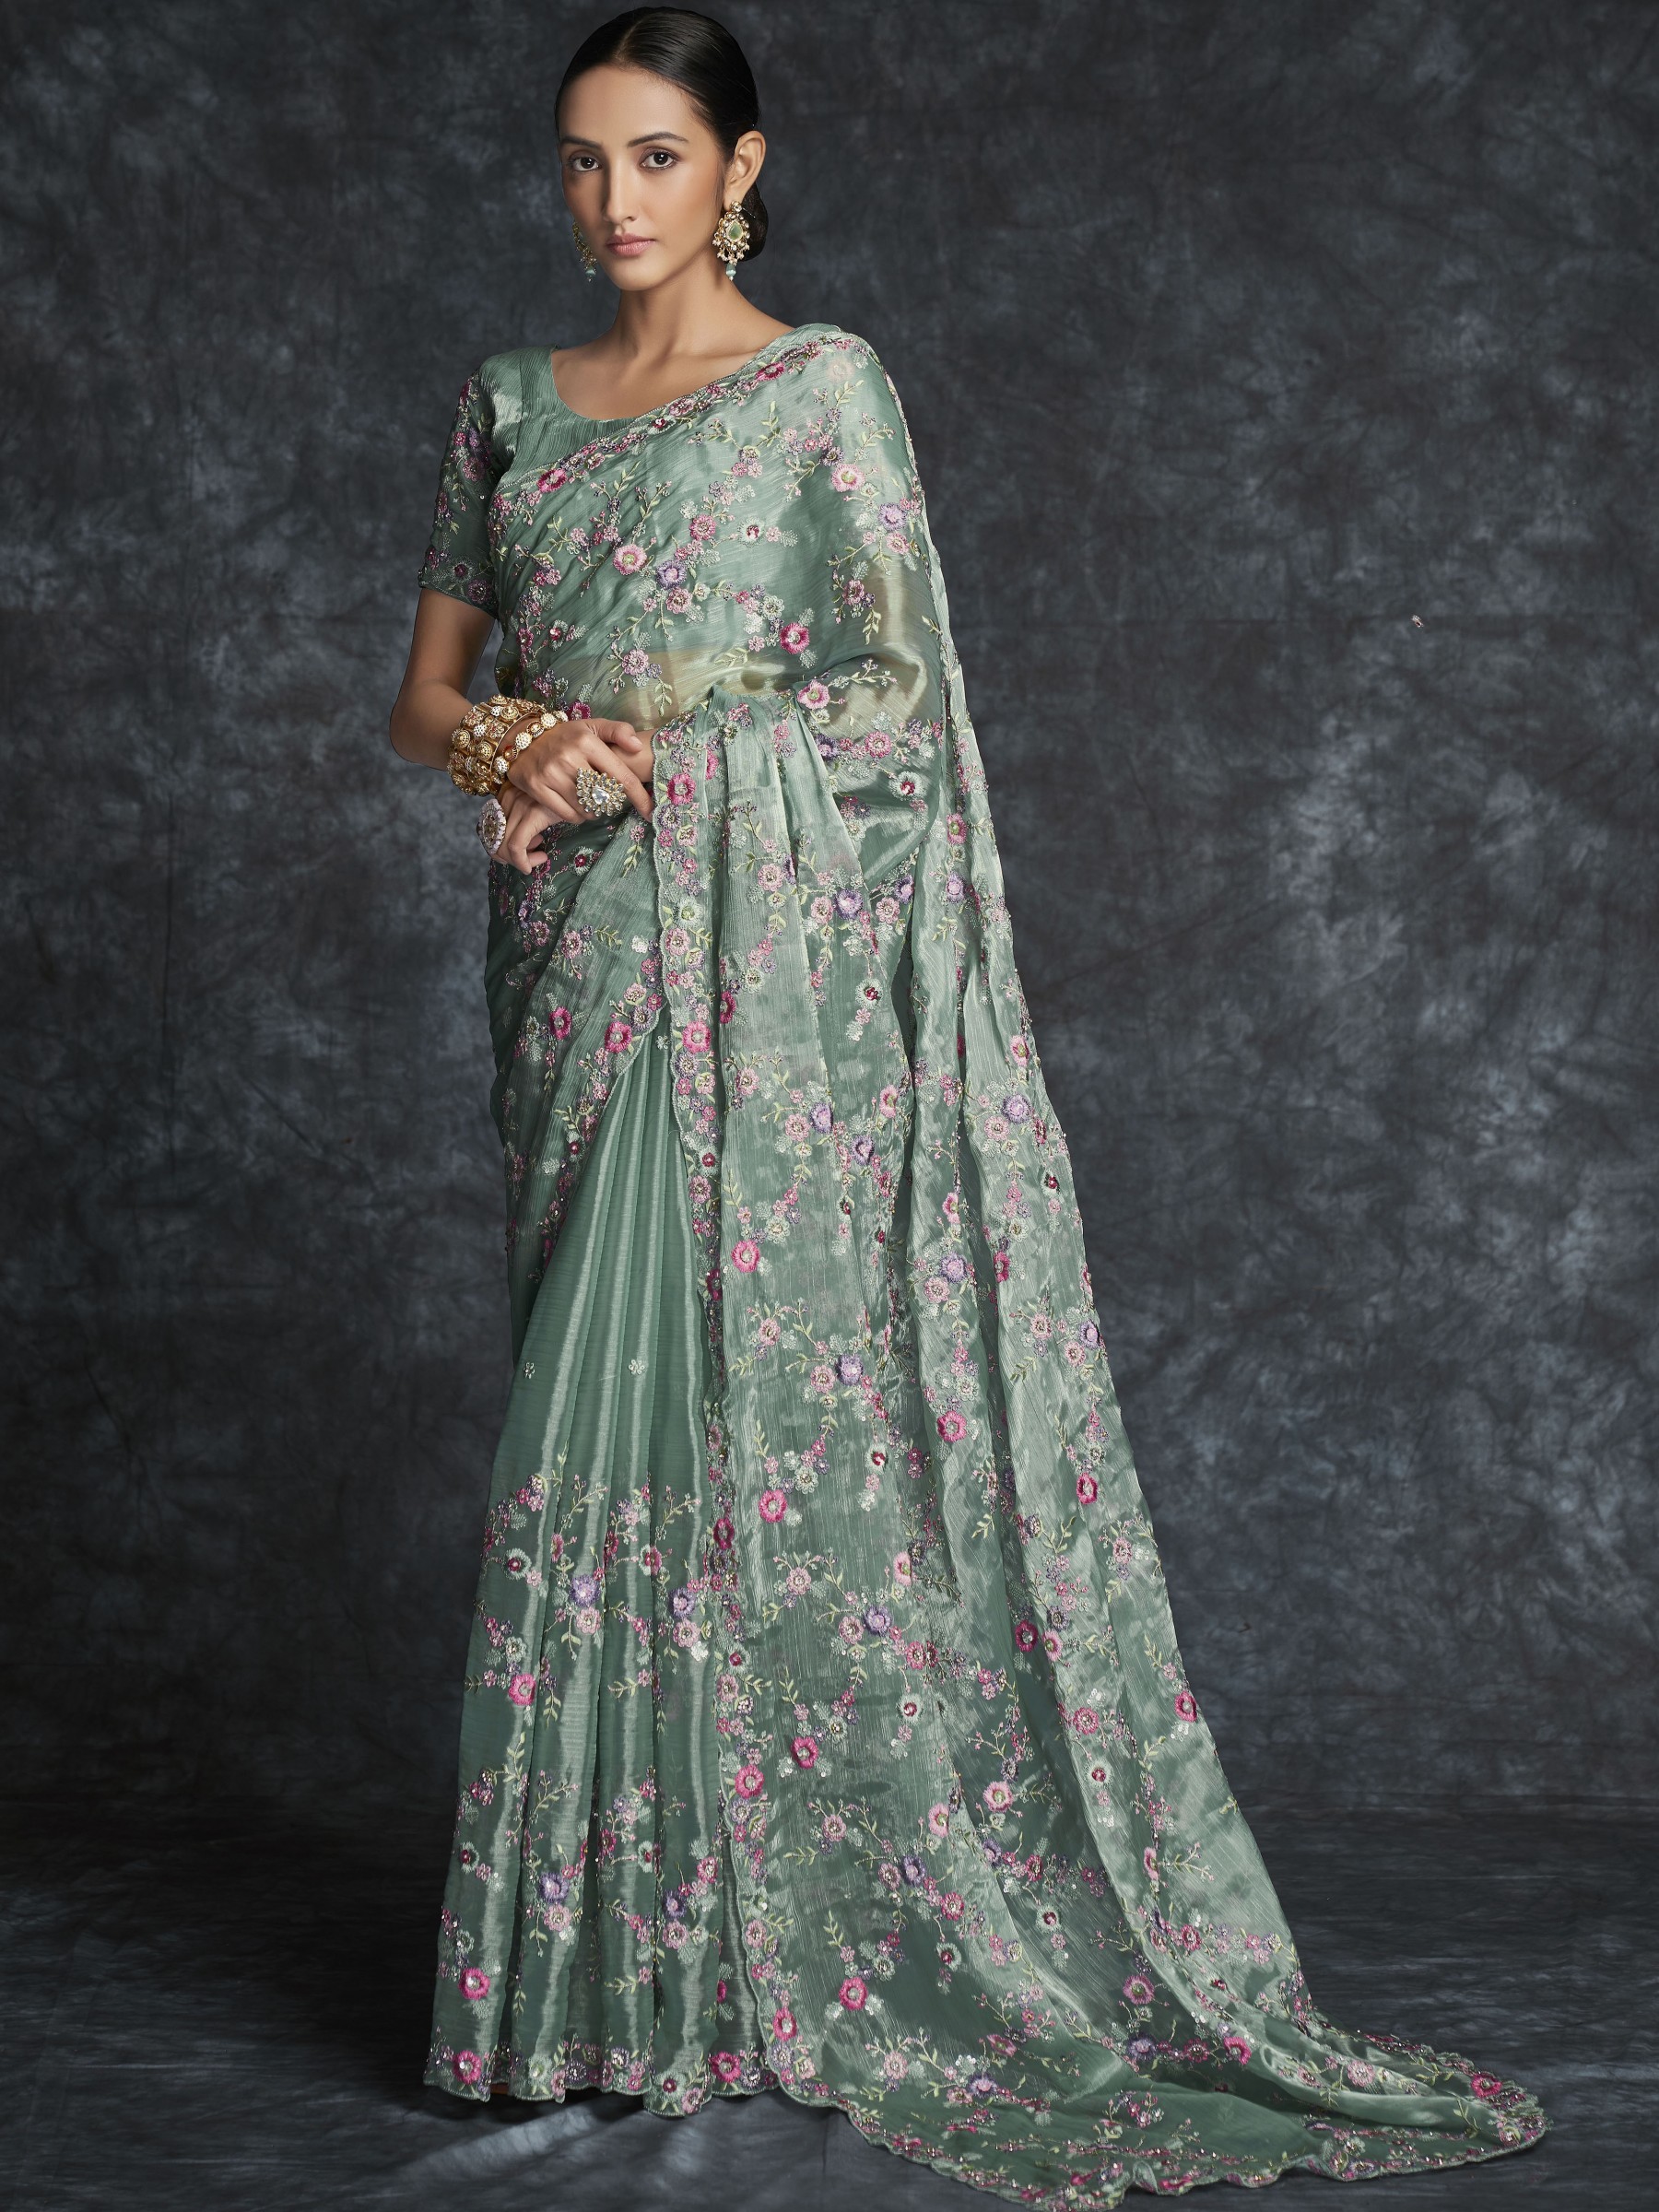 Organza Saree In Sea Green Color With Embroidery Work